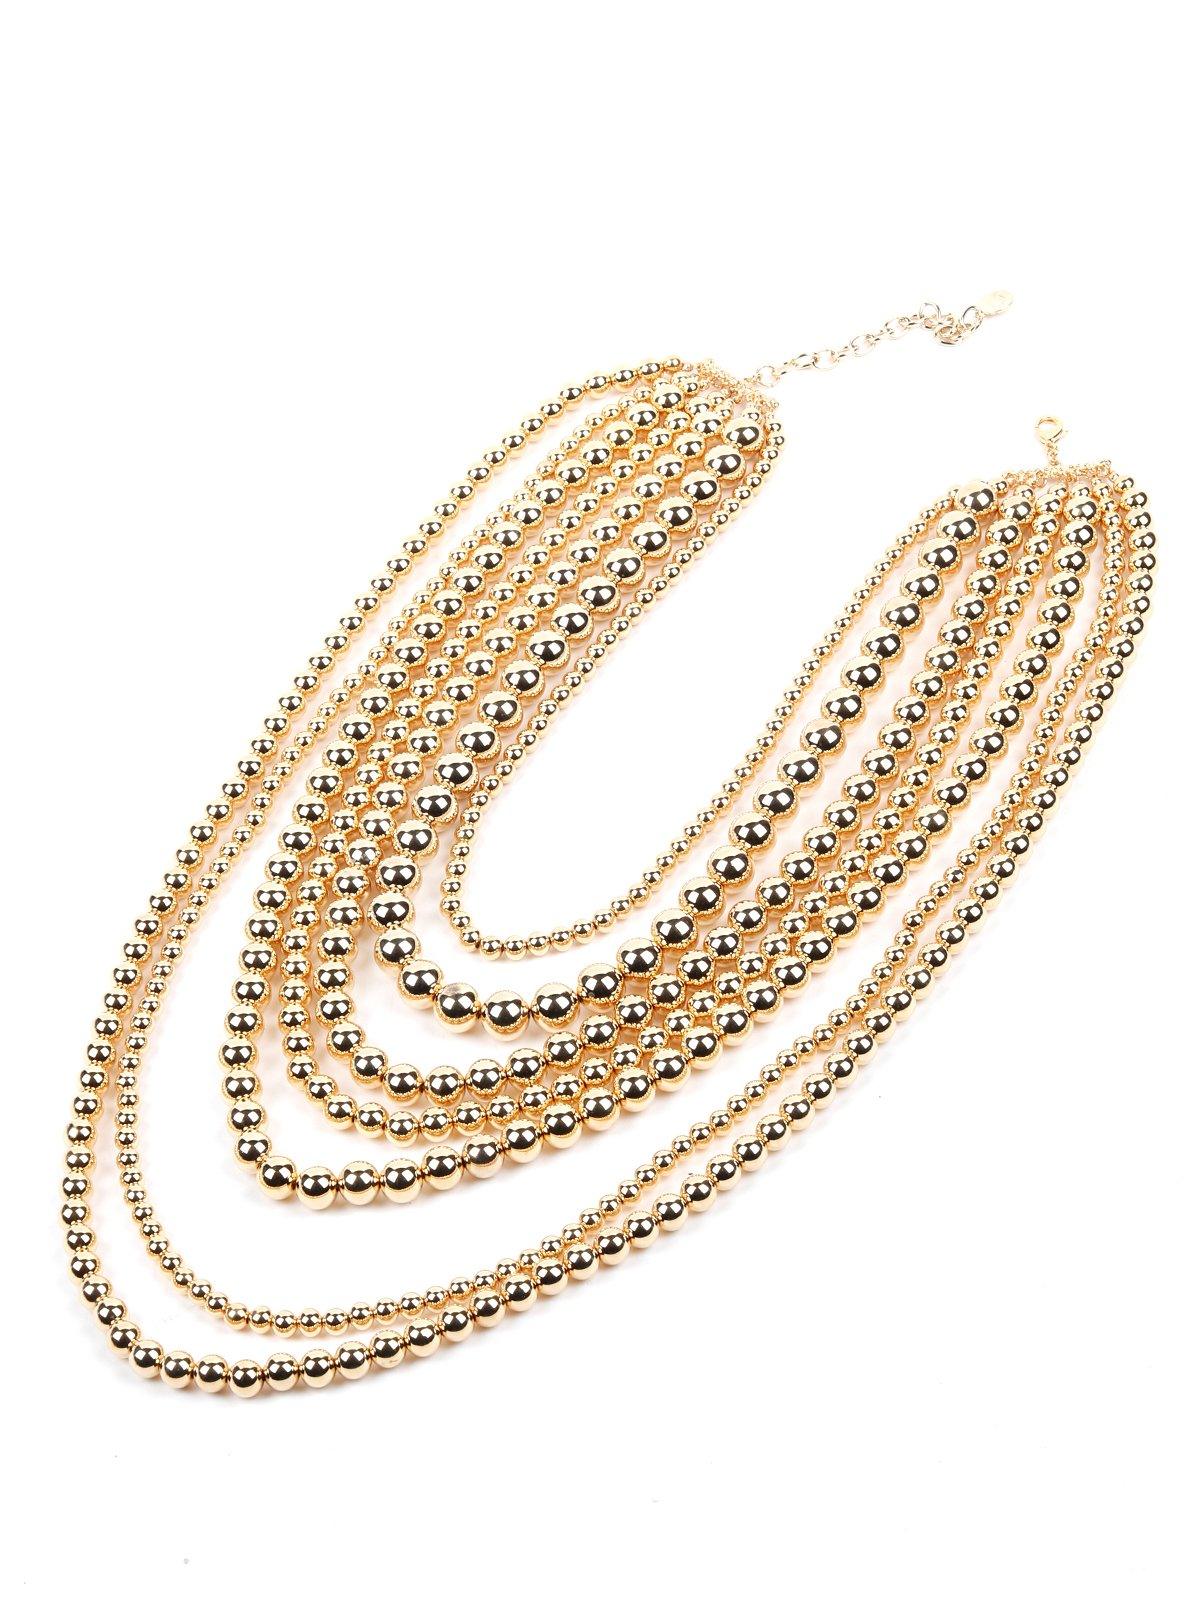 Women's Sparking Multi-Strands Gold Beaded Necklace With Earrings. - Odette